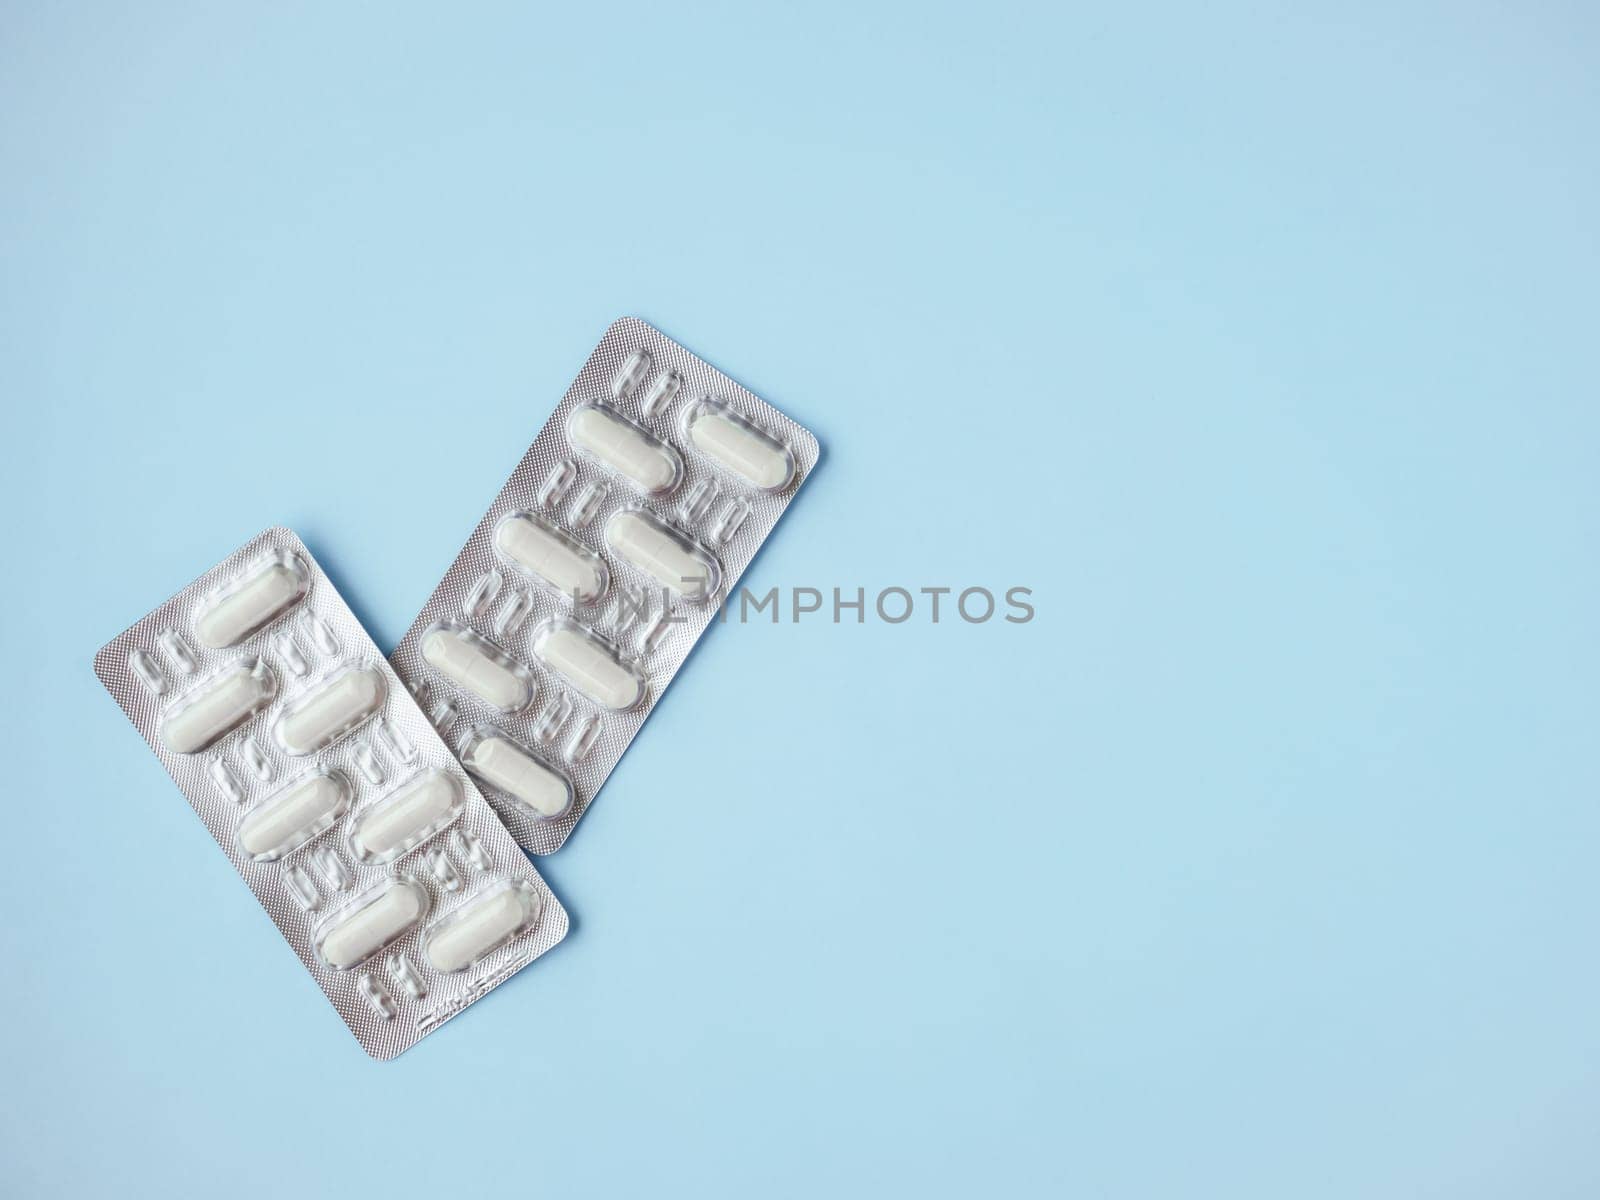 Pharmaceutical medicament, cure in container for health. Medicine pills or capsules on blister pack on blue background with copy space. Drug prescription for treatment medication. Antibiotic